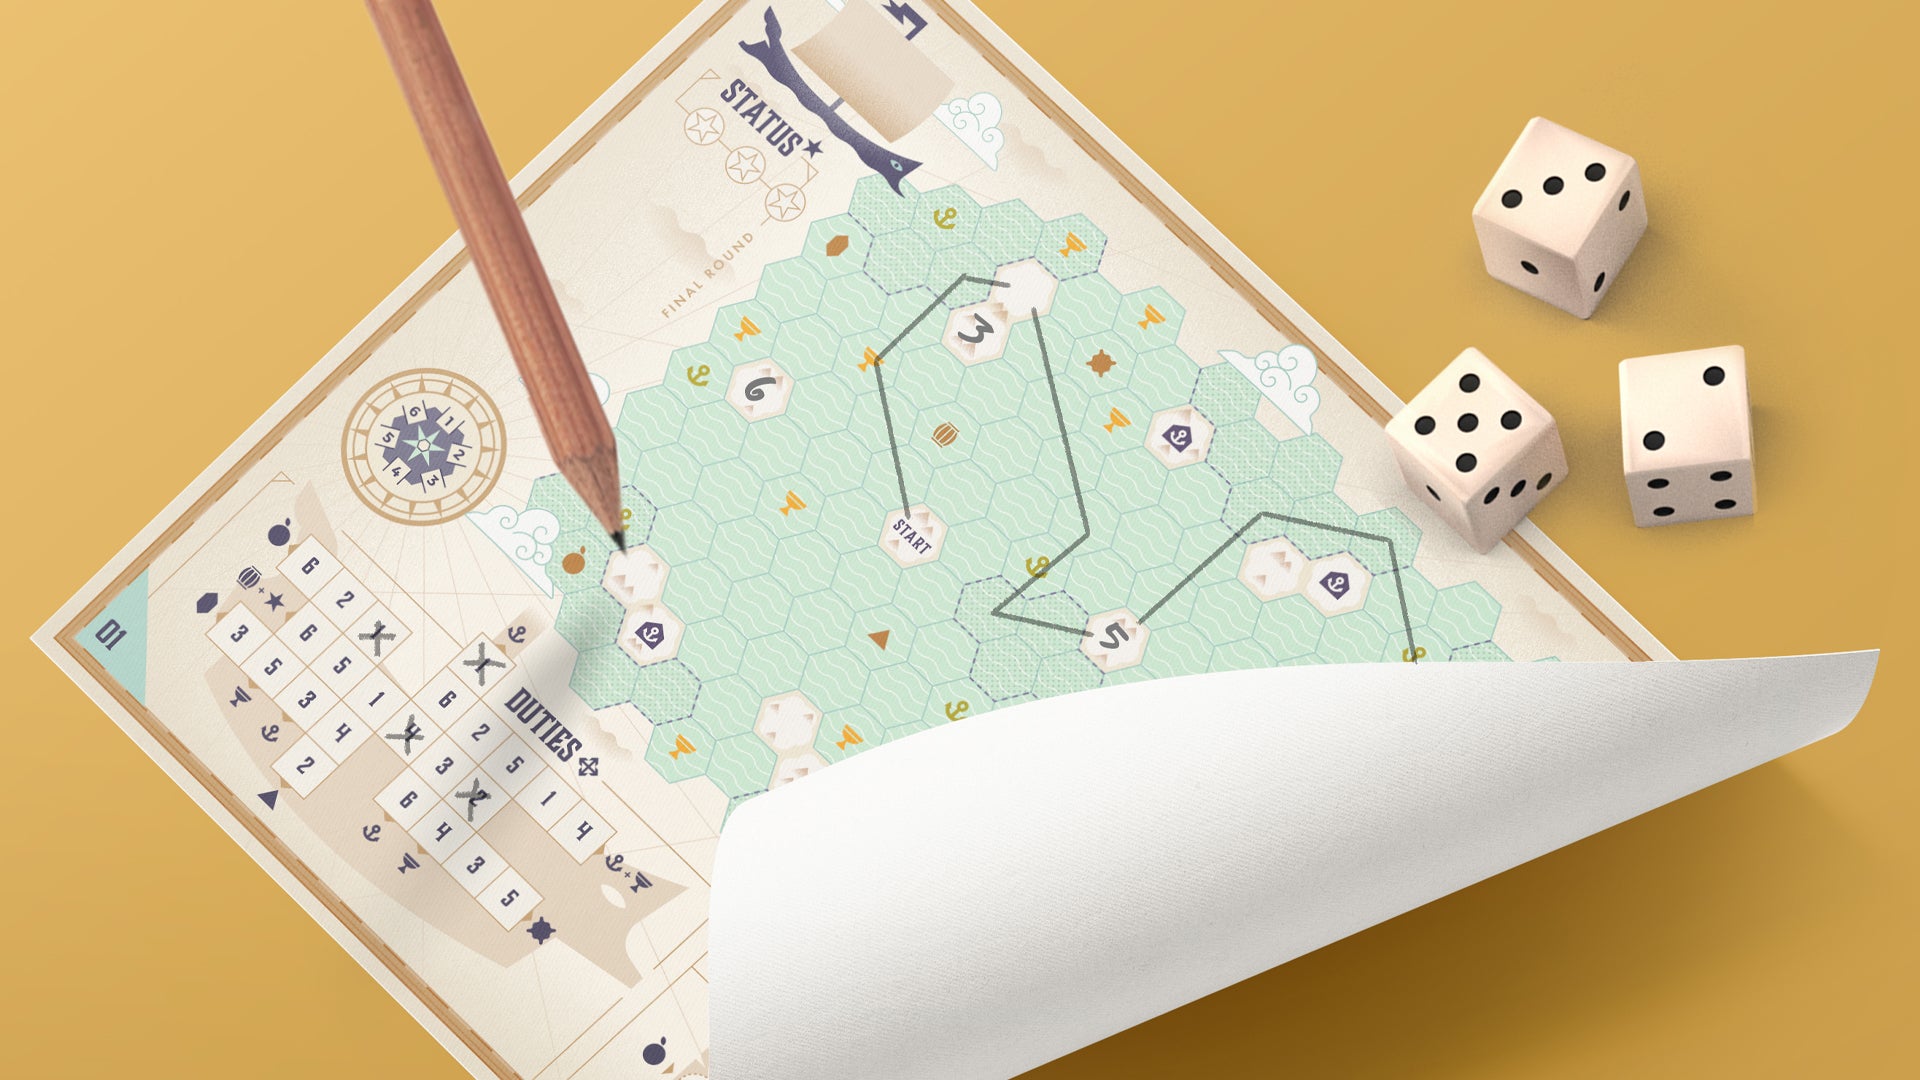 Image for Elysium and Skora designers open studio focused on eco-friendly board games you can print at home